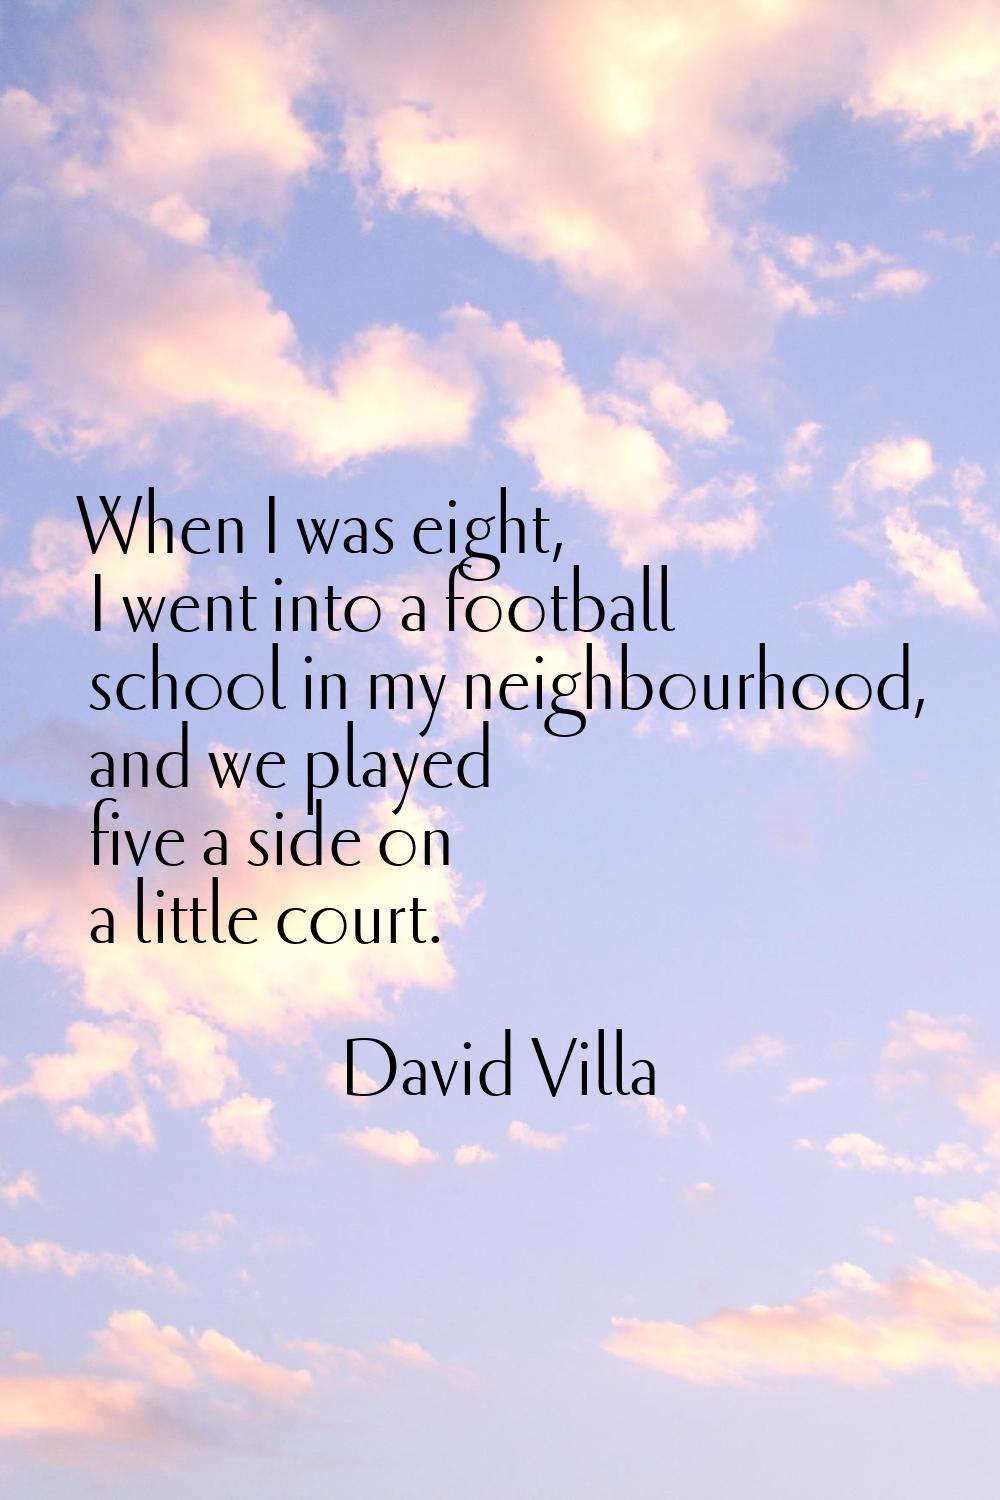 When I was eight, I went into a football school in my neighbourhood, and we played five a side on a